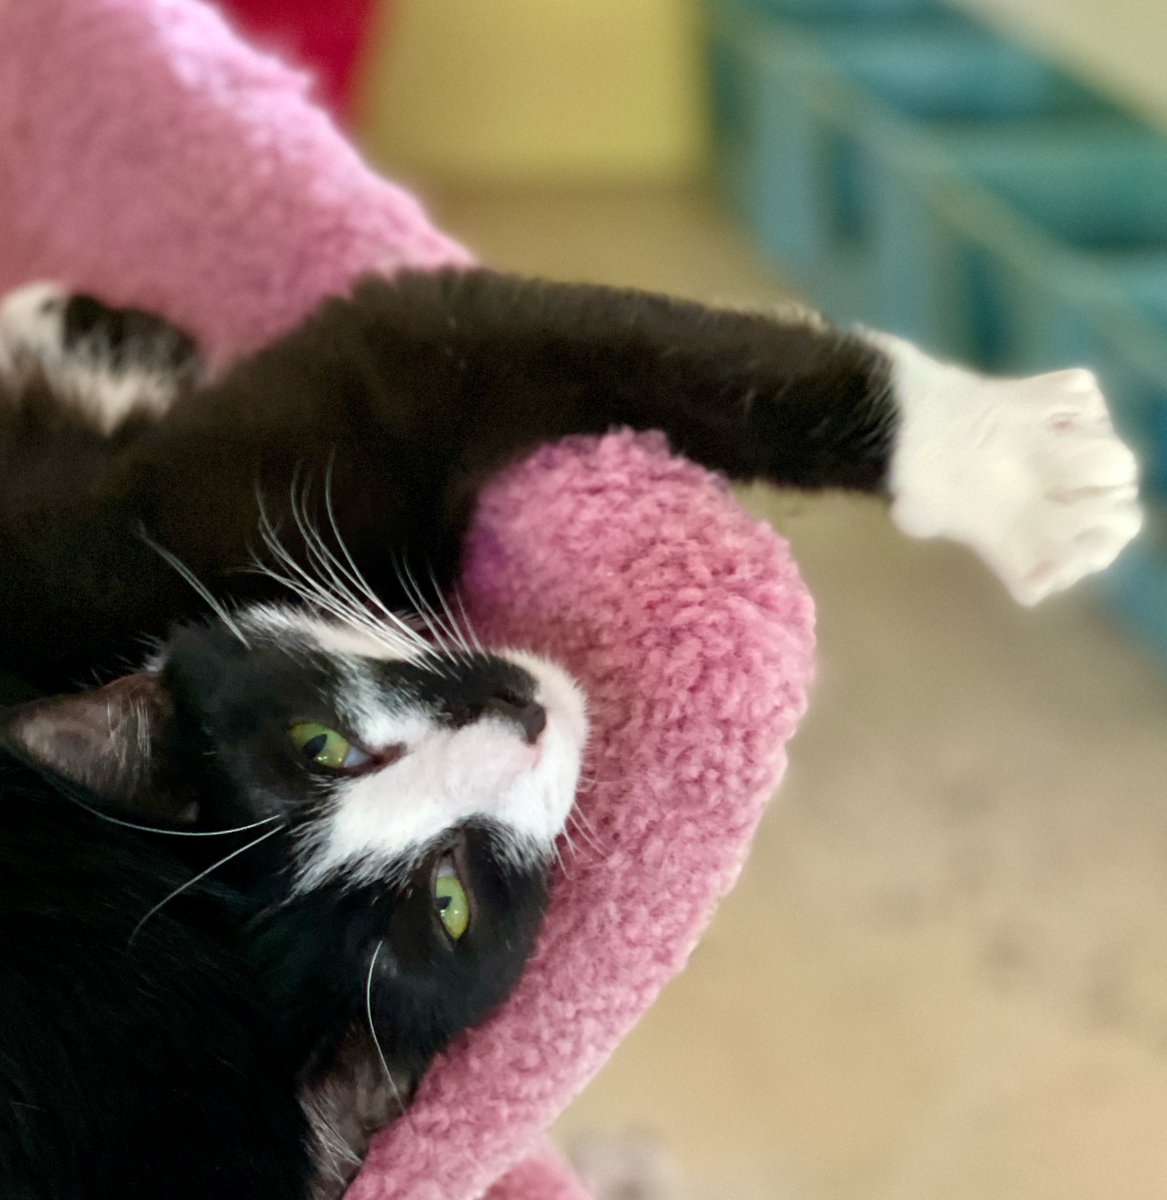 Jinxy has his spots & this is one of his favorites.  He likes being picked up more than any other #cat in the shelter💖#adoptdontshop #friday #PositiveVibes #kittens #cats #pets #cute #rescue #virginia #nva #va #nova #dc #washingtondc #KittyTwitter #FridayVibes #chill #relax